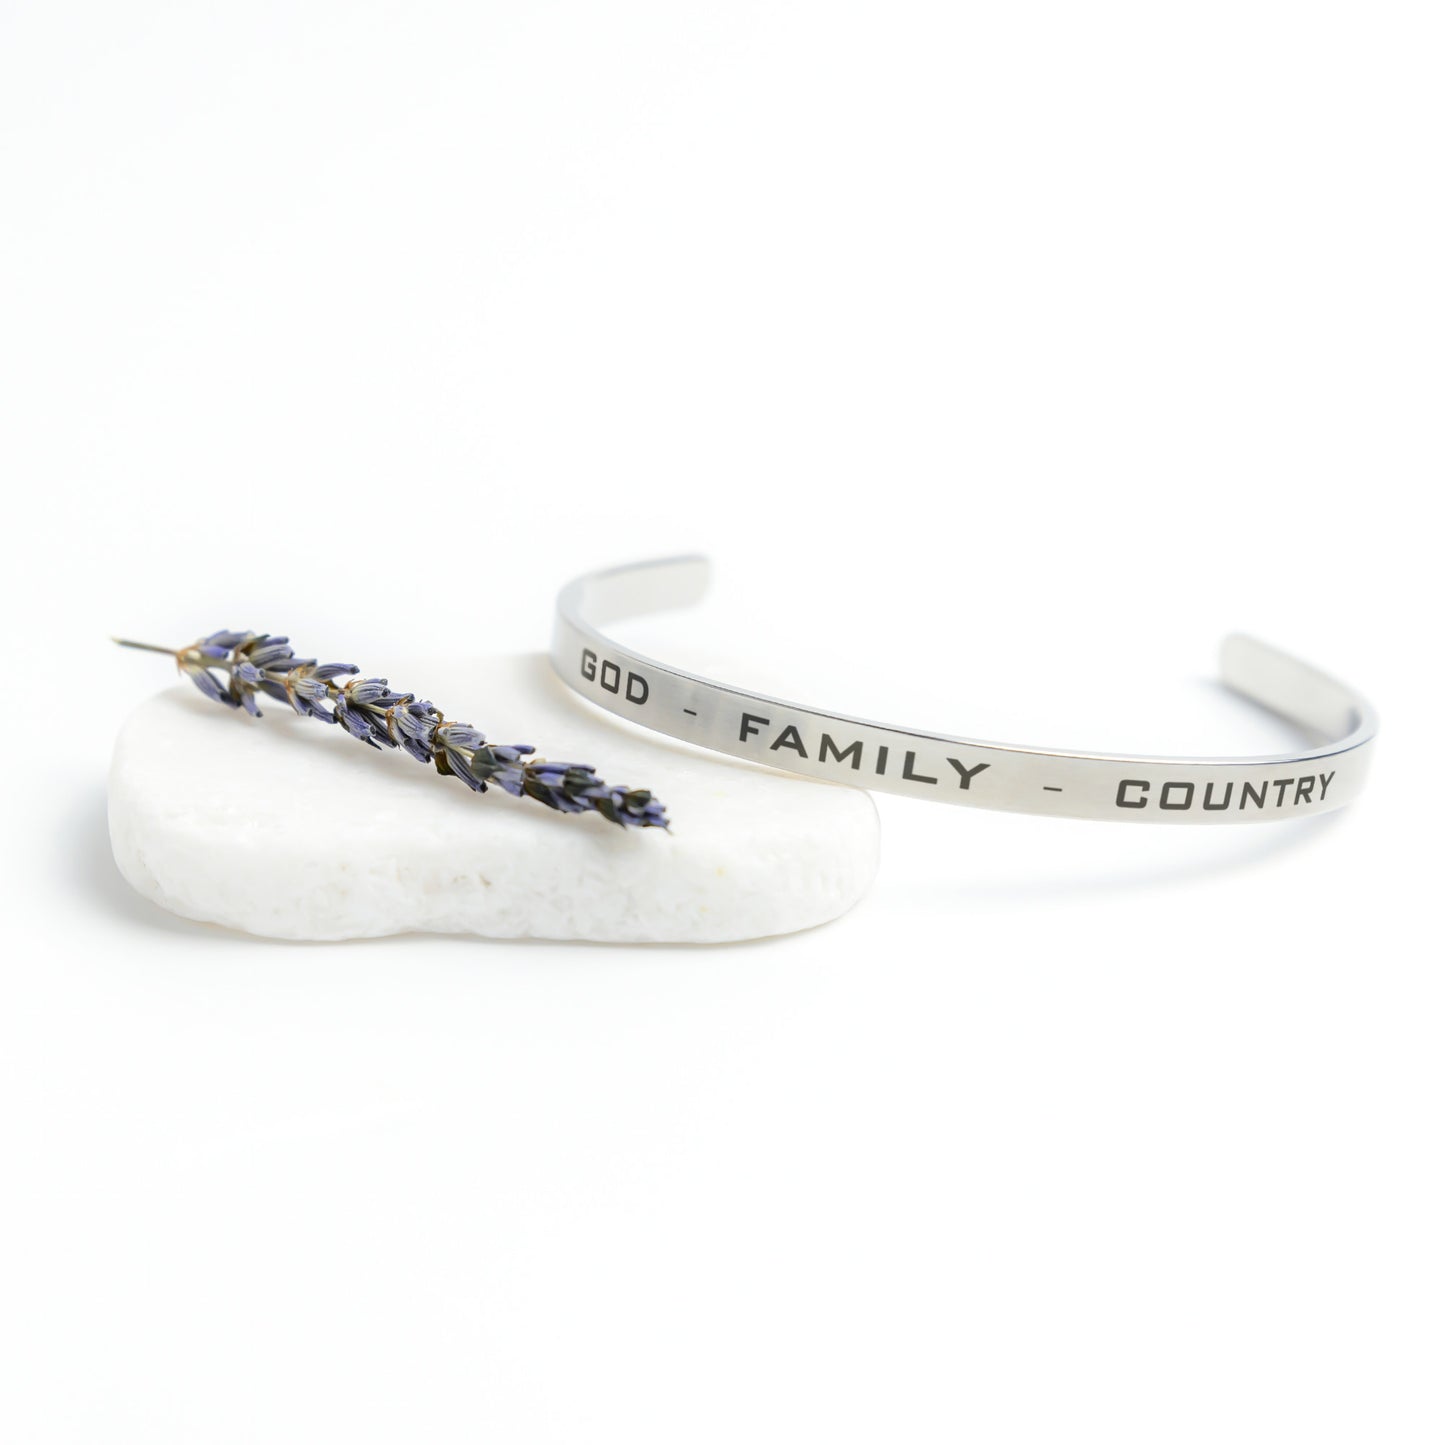 It's Just God, Family & Country Cuff Bracelet